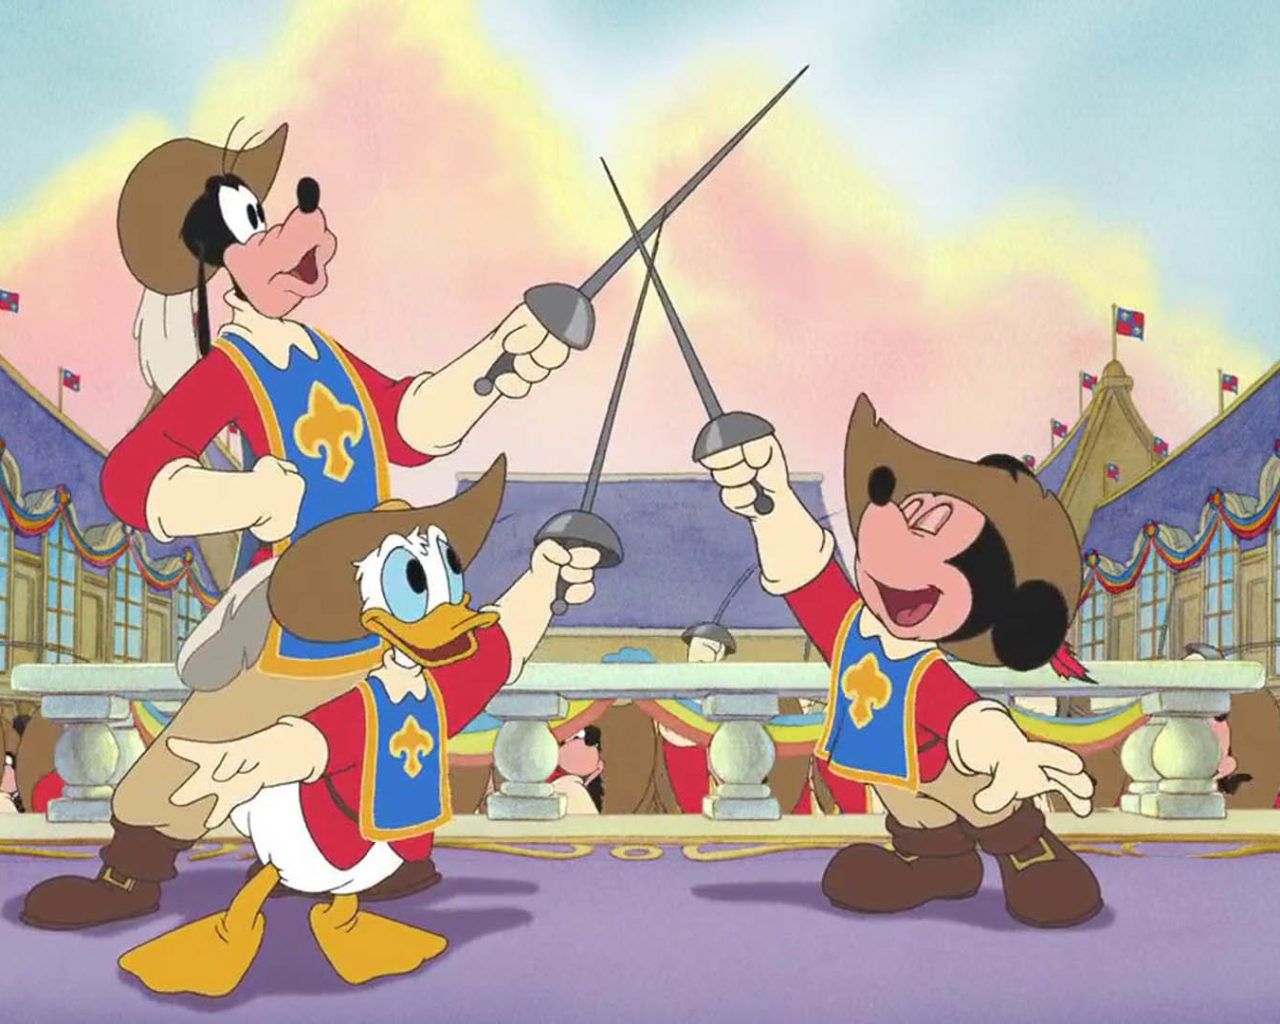 The Three Musketeers Mickey Donald Goofy HD Wallpaper For Your Computer 1920x1080, Wallpaper13.com